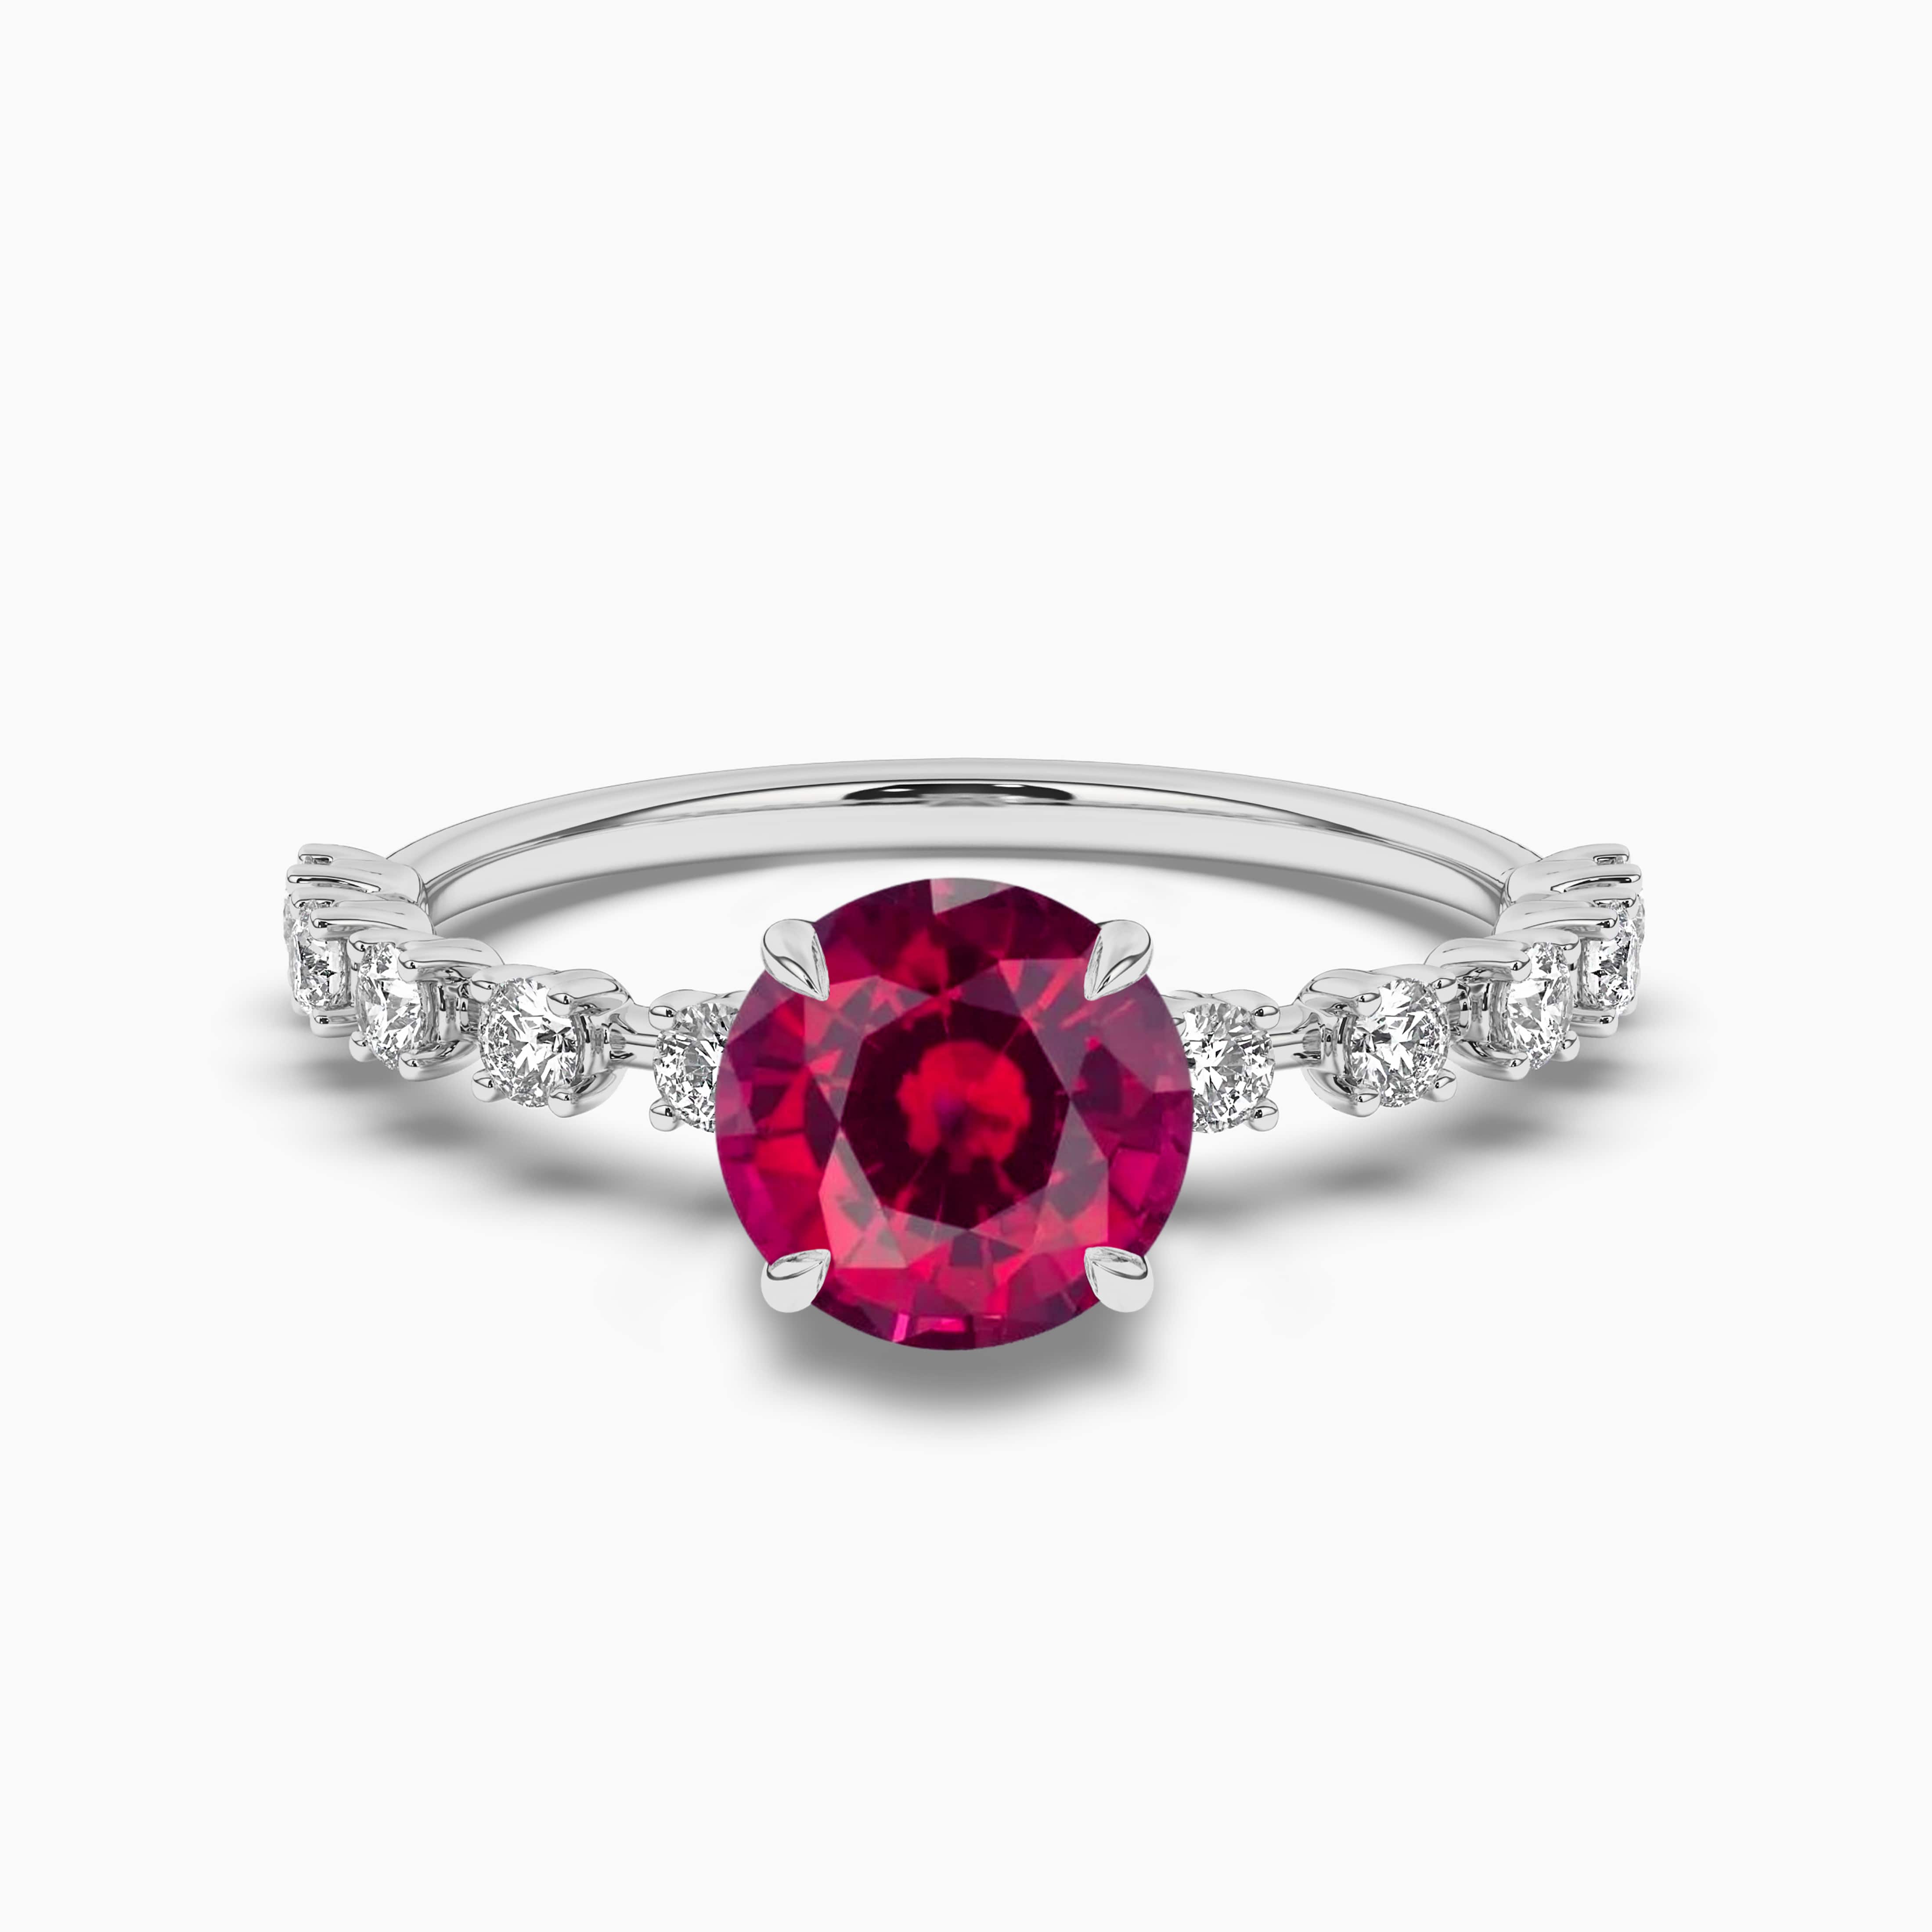 Round Cut Natural Red Ruby Gemstone Ring For Wedding Gift